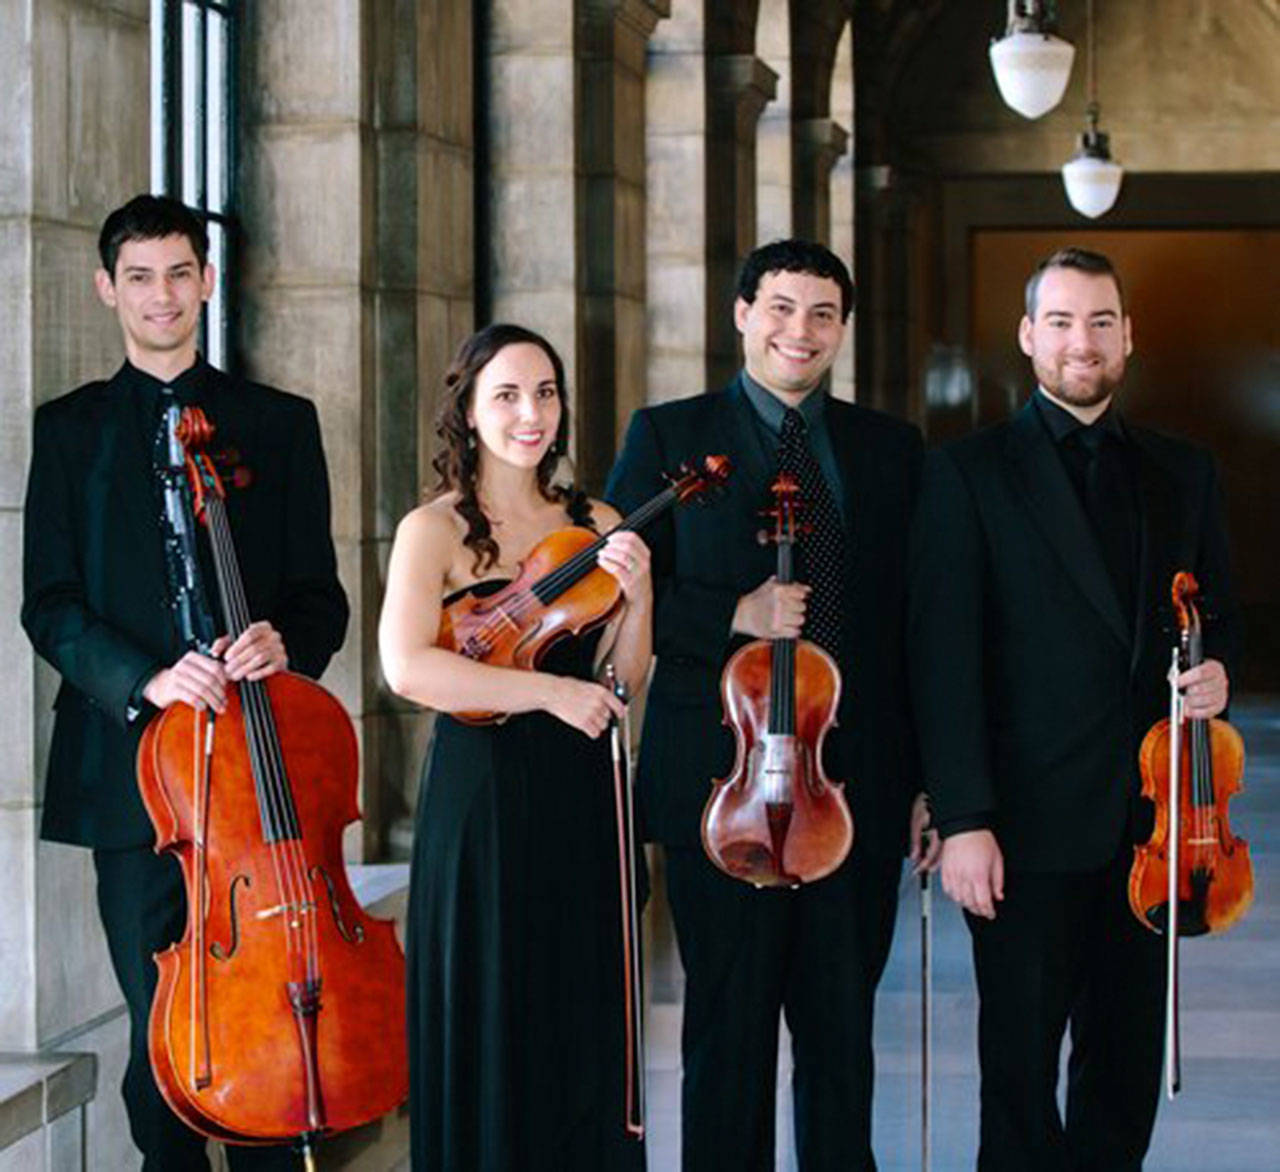 The Skyros String Quartet will perform on Sunday, April 8 at Waterfront Park Community Center for the next First Sunday Concert. (Photo courtesy of First Sundays Concerts)